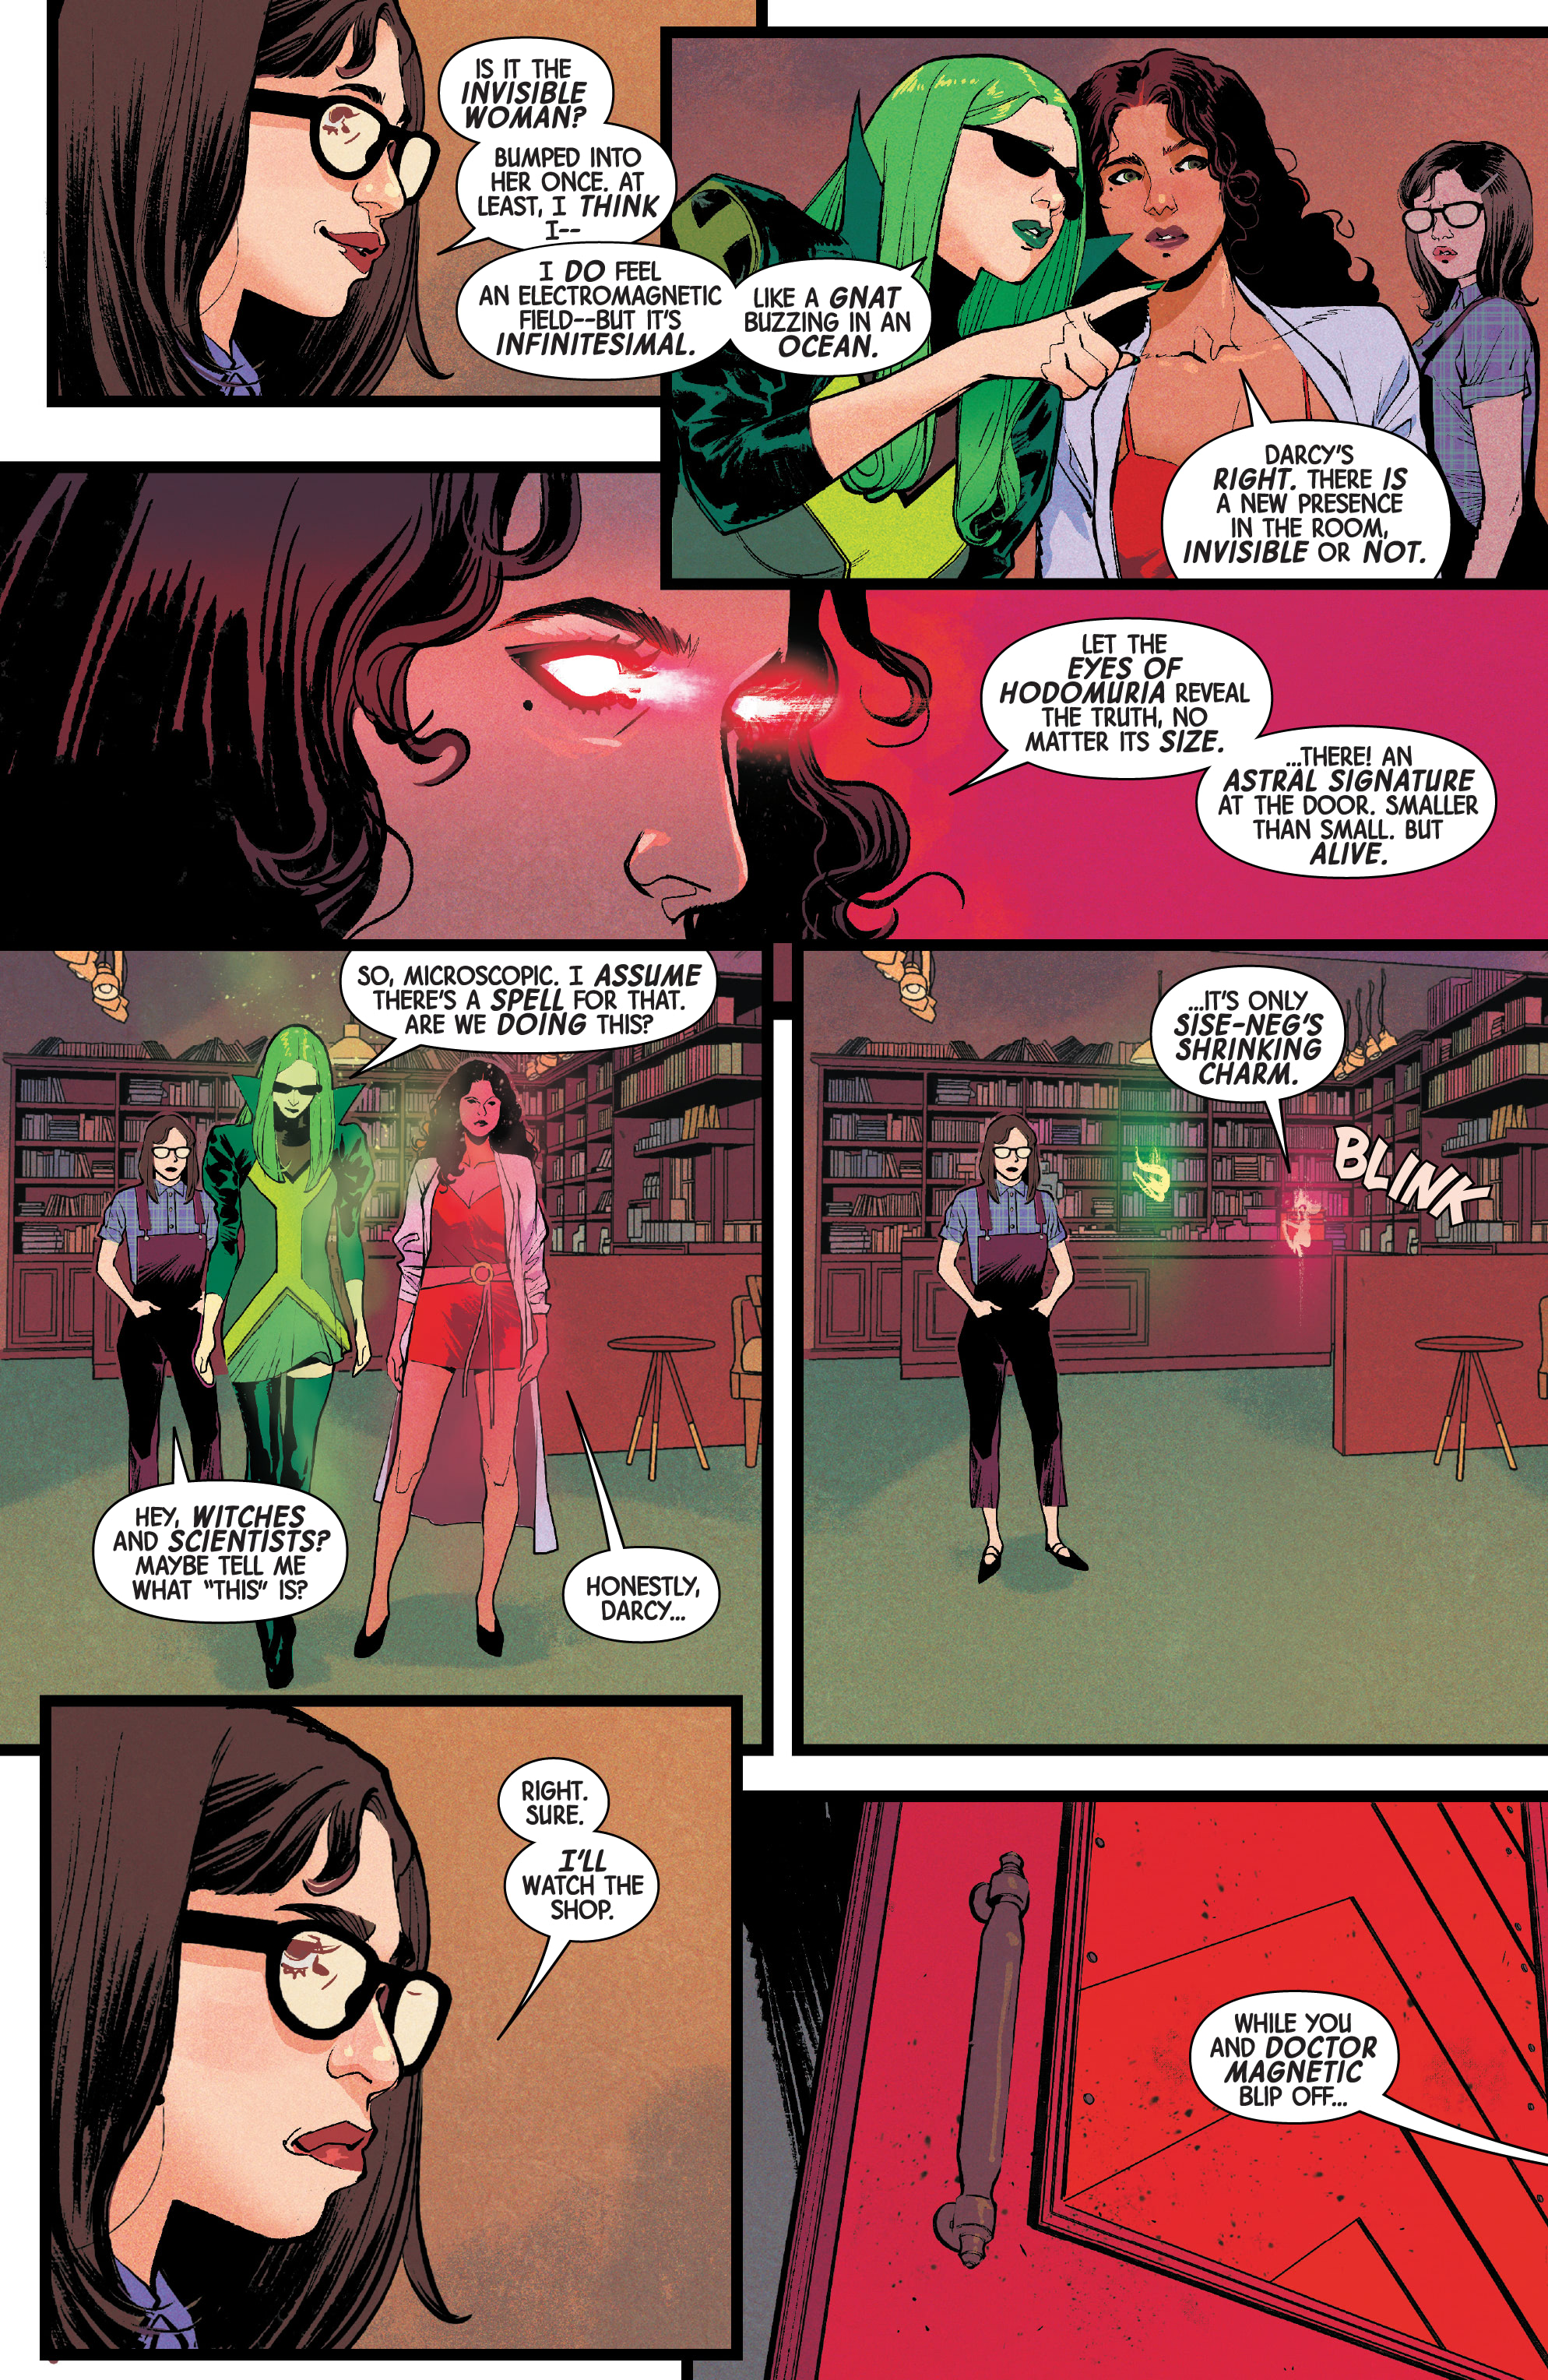 Scarlet Witch (2023-) Chapter 8 - Page 7